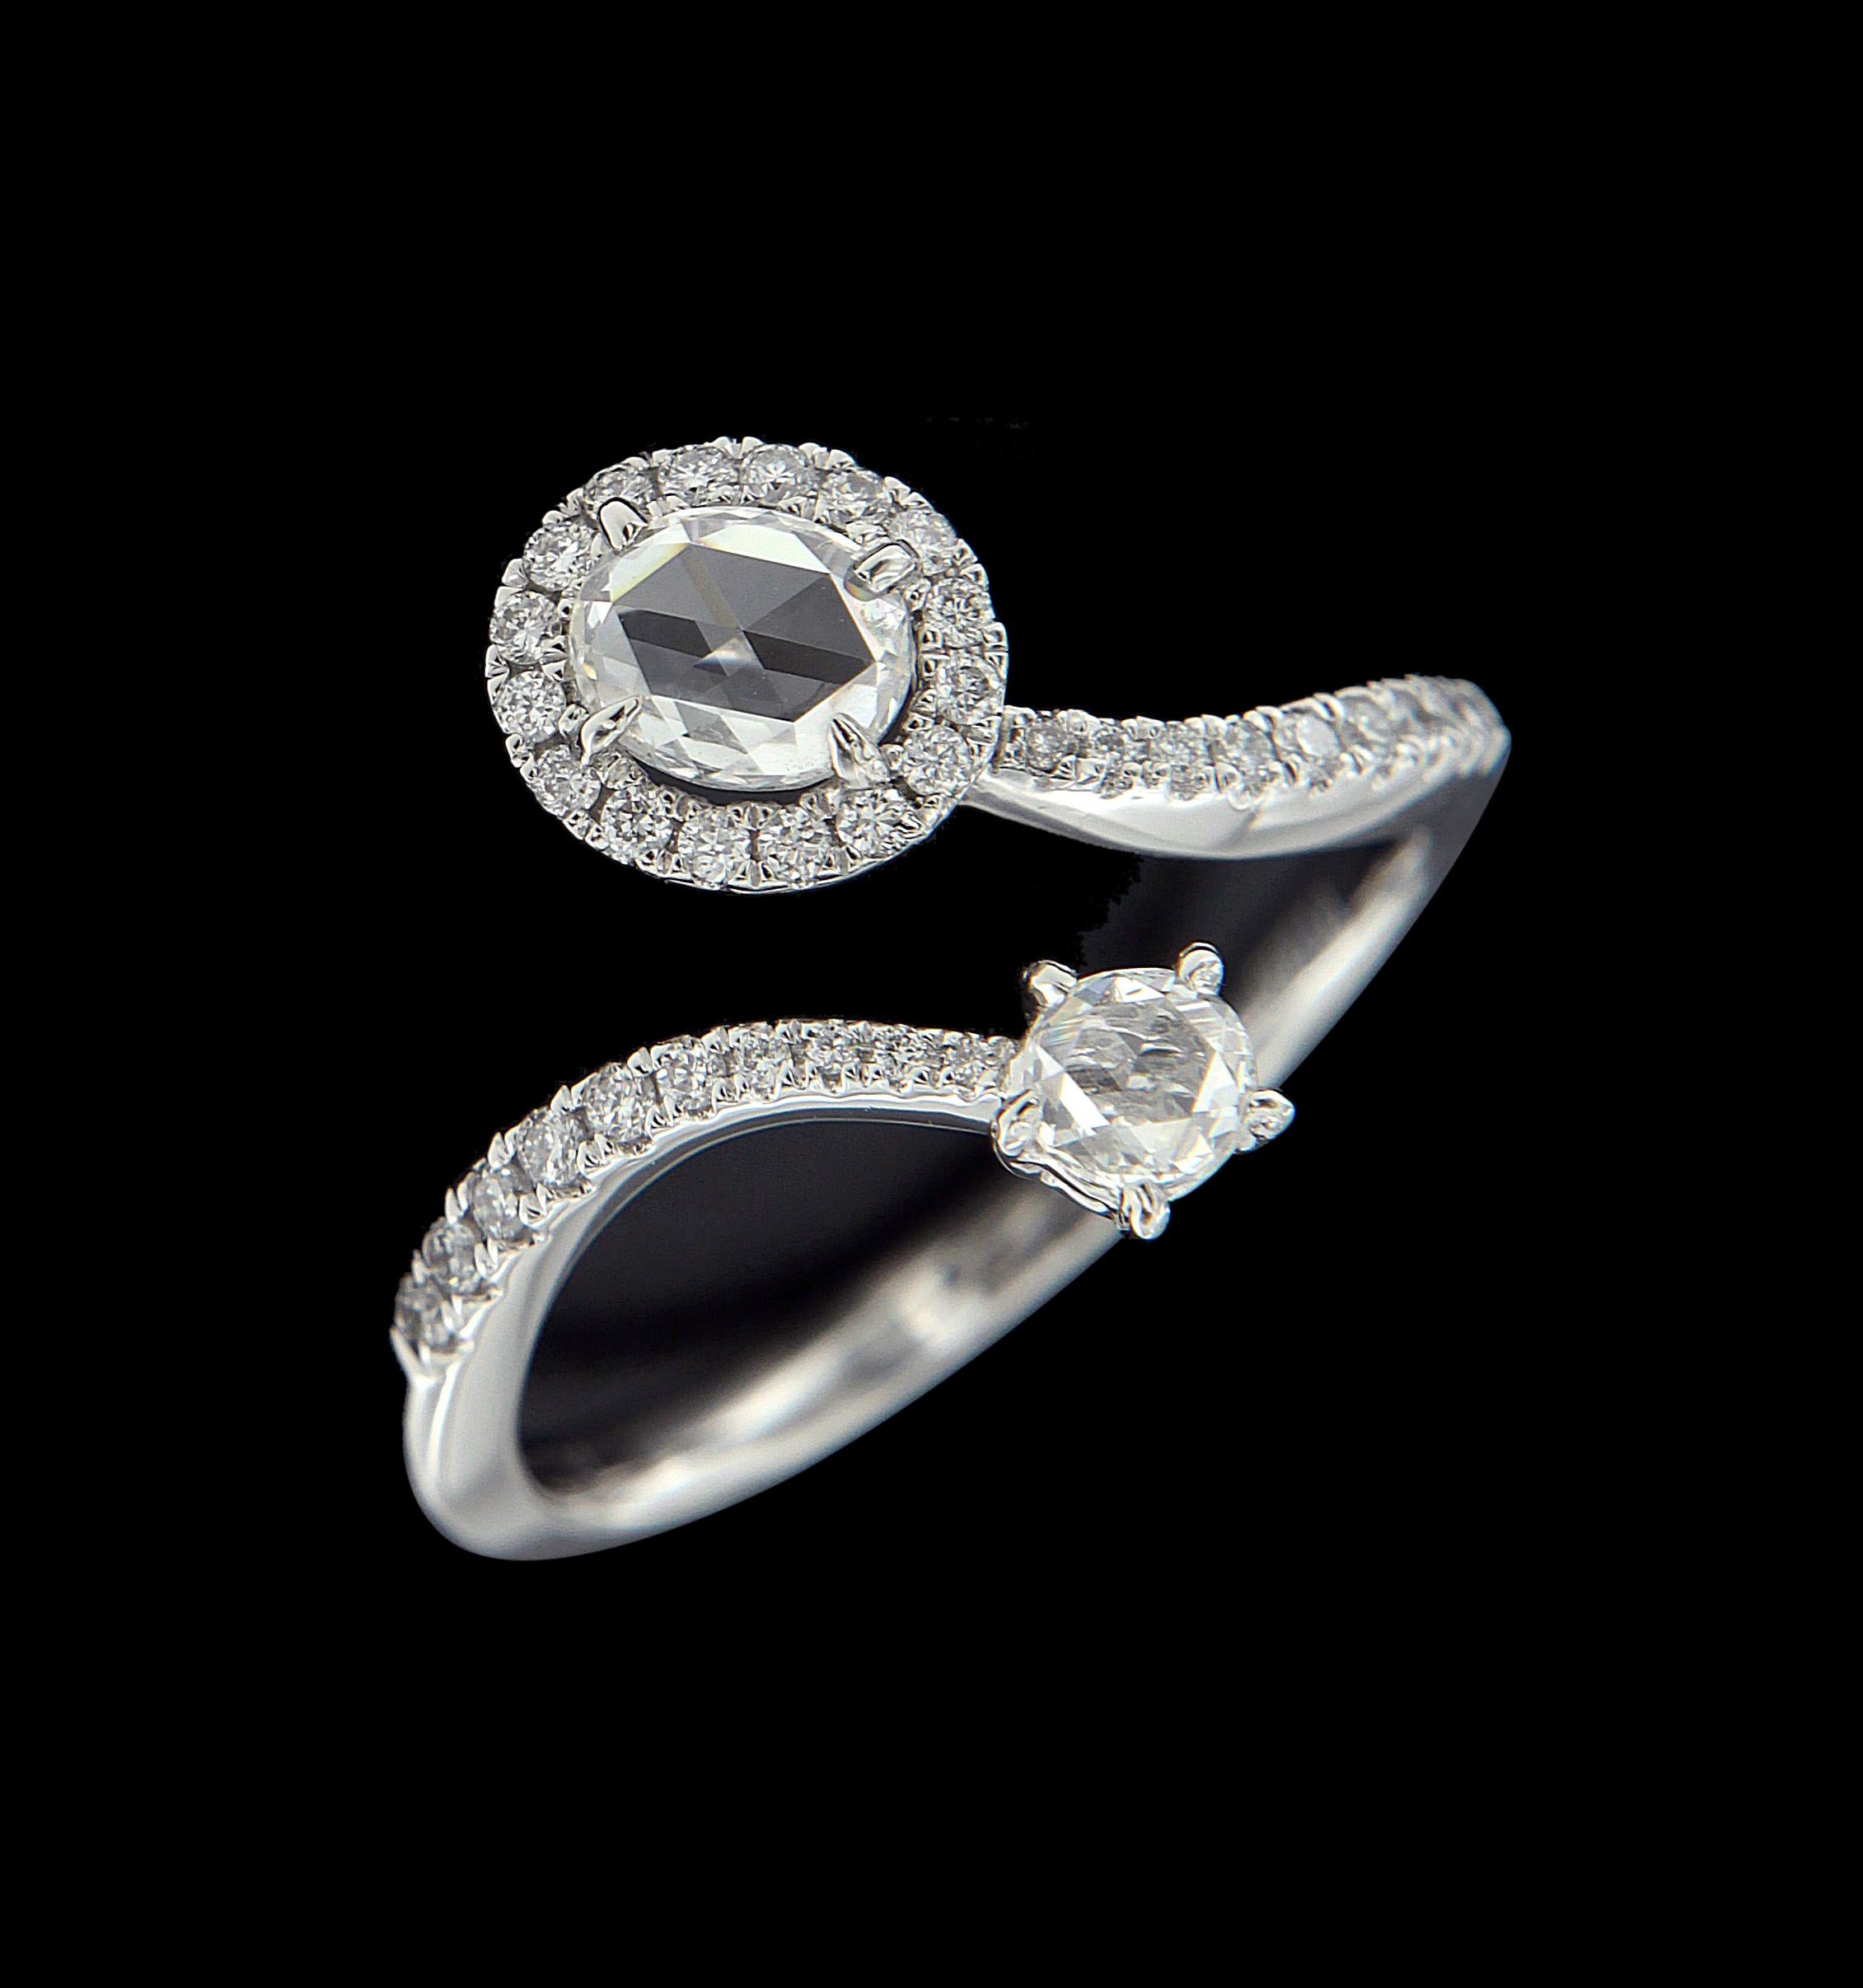 Gorgeous 18 Karat White Gold And  Diamond Ring 
Ring 
Diamonds weighing approximately around 0.657 carats , mounted on 18 karat White gold ring. The ring weighs around 3.789 grams approximately. 

Please note: The prices listed do not include any